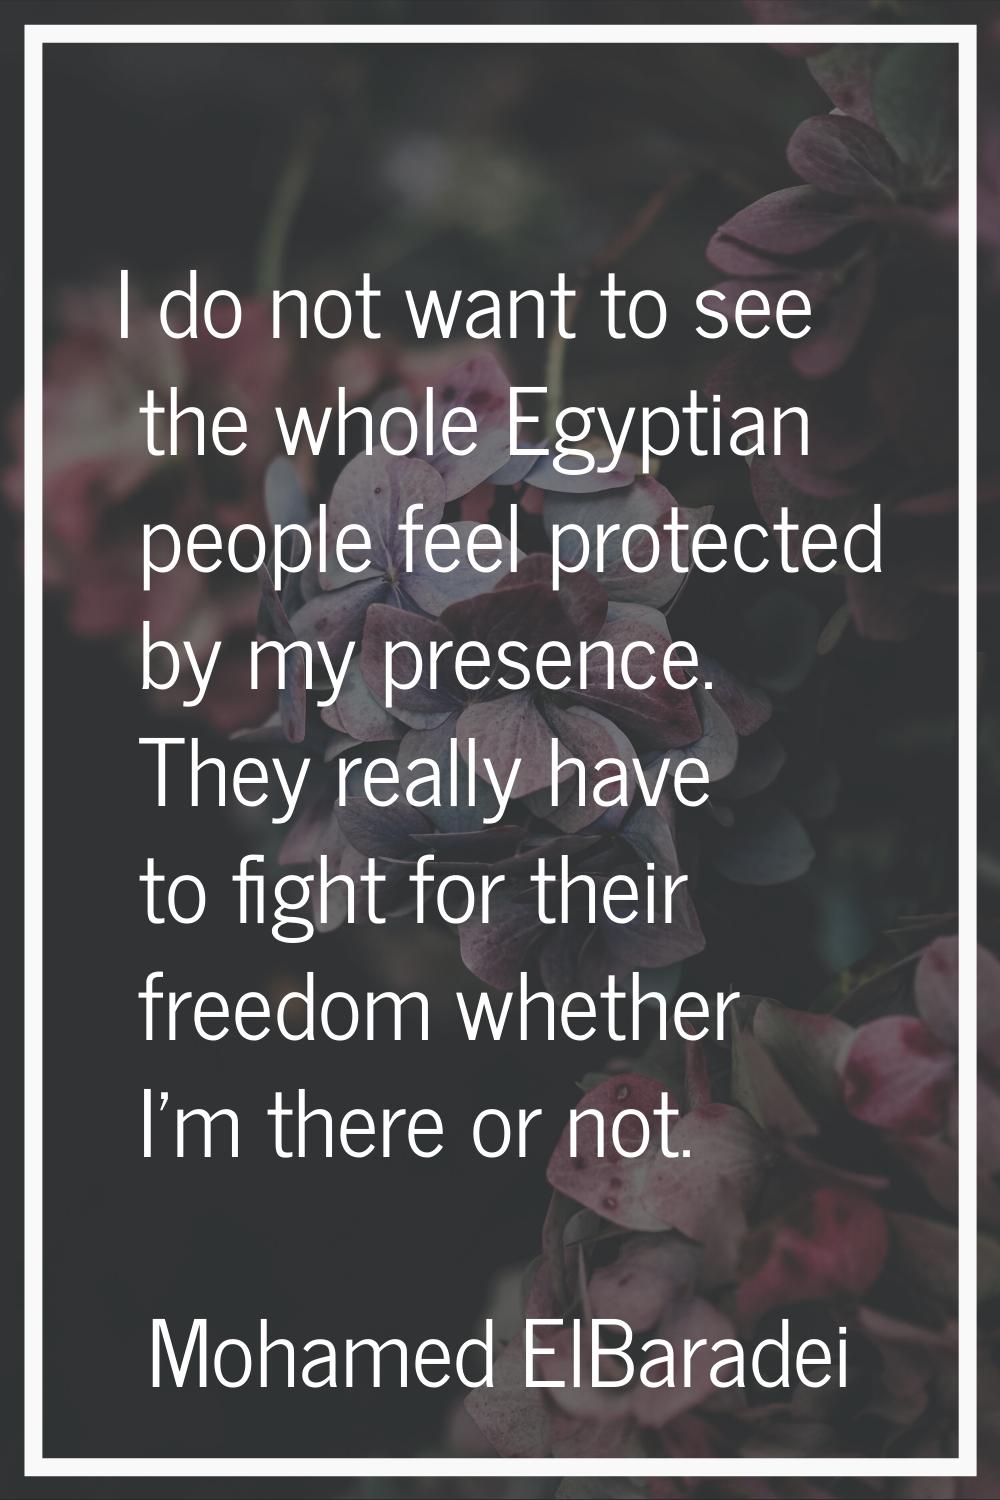 I do not want to see the whole Egyptian people feel protected by my presence. They really have to f